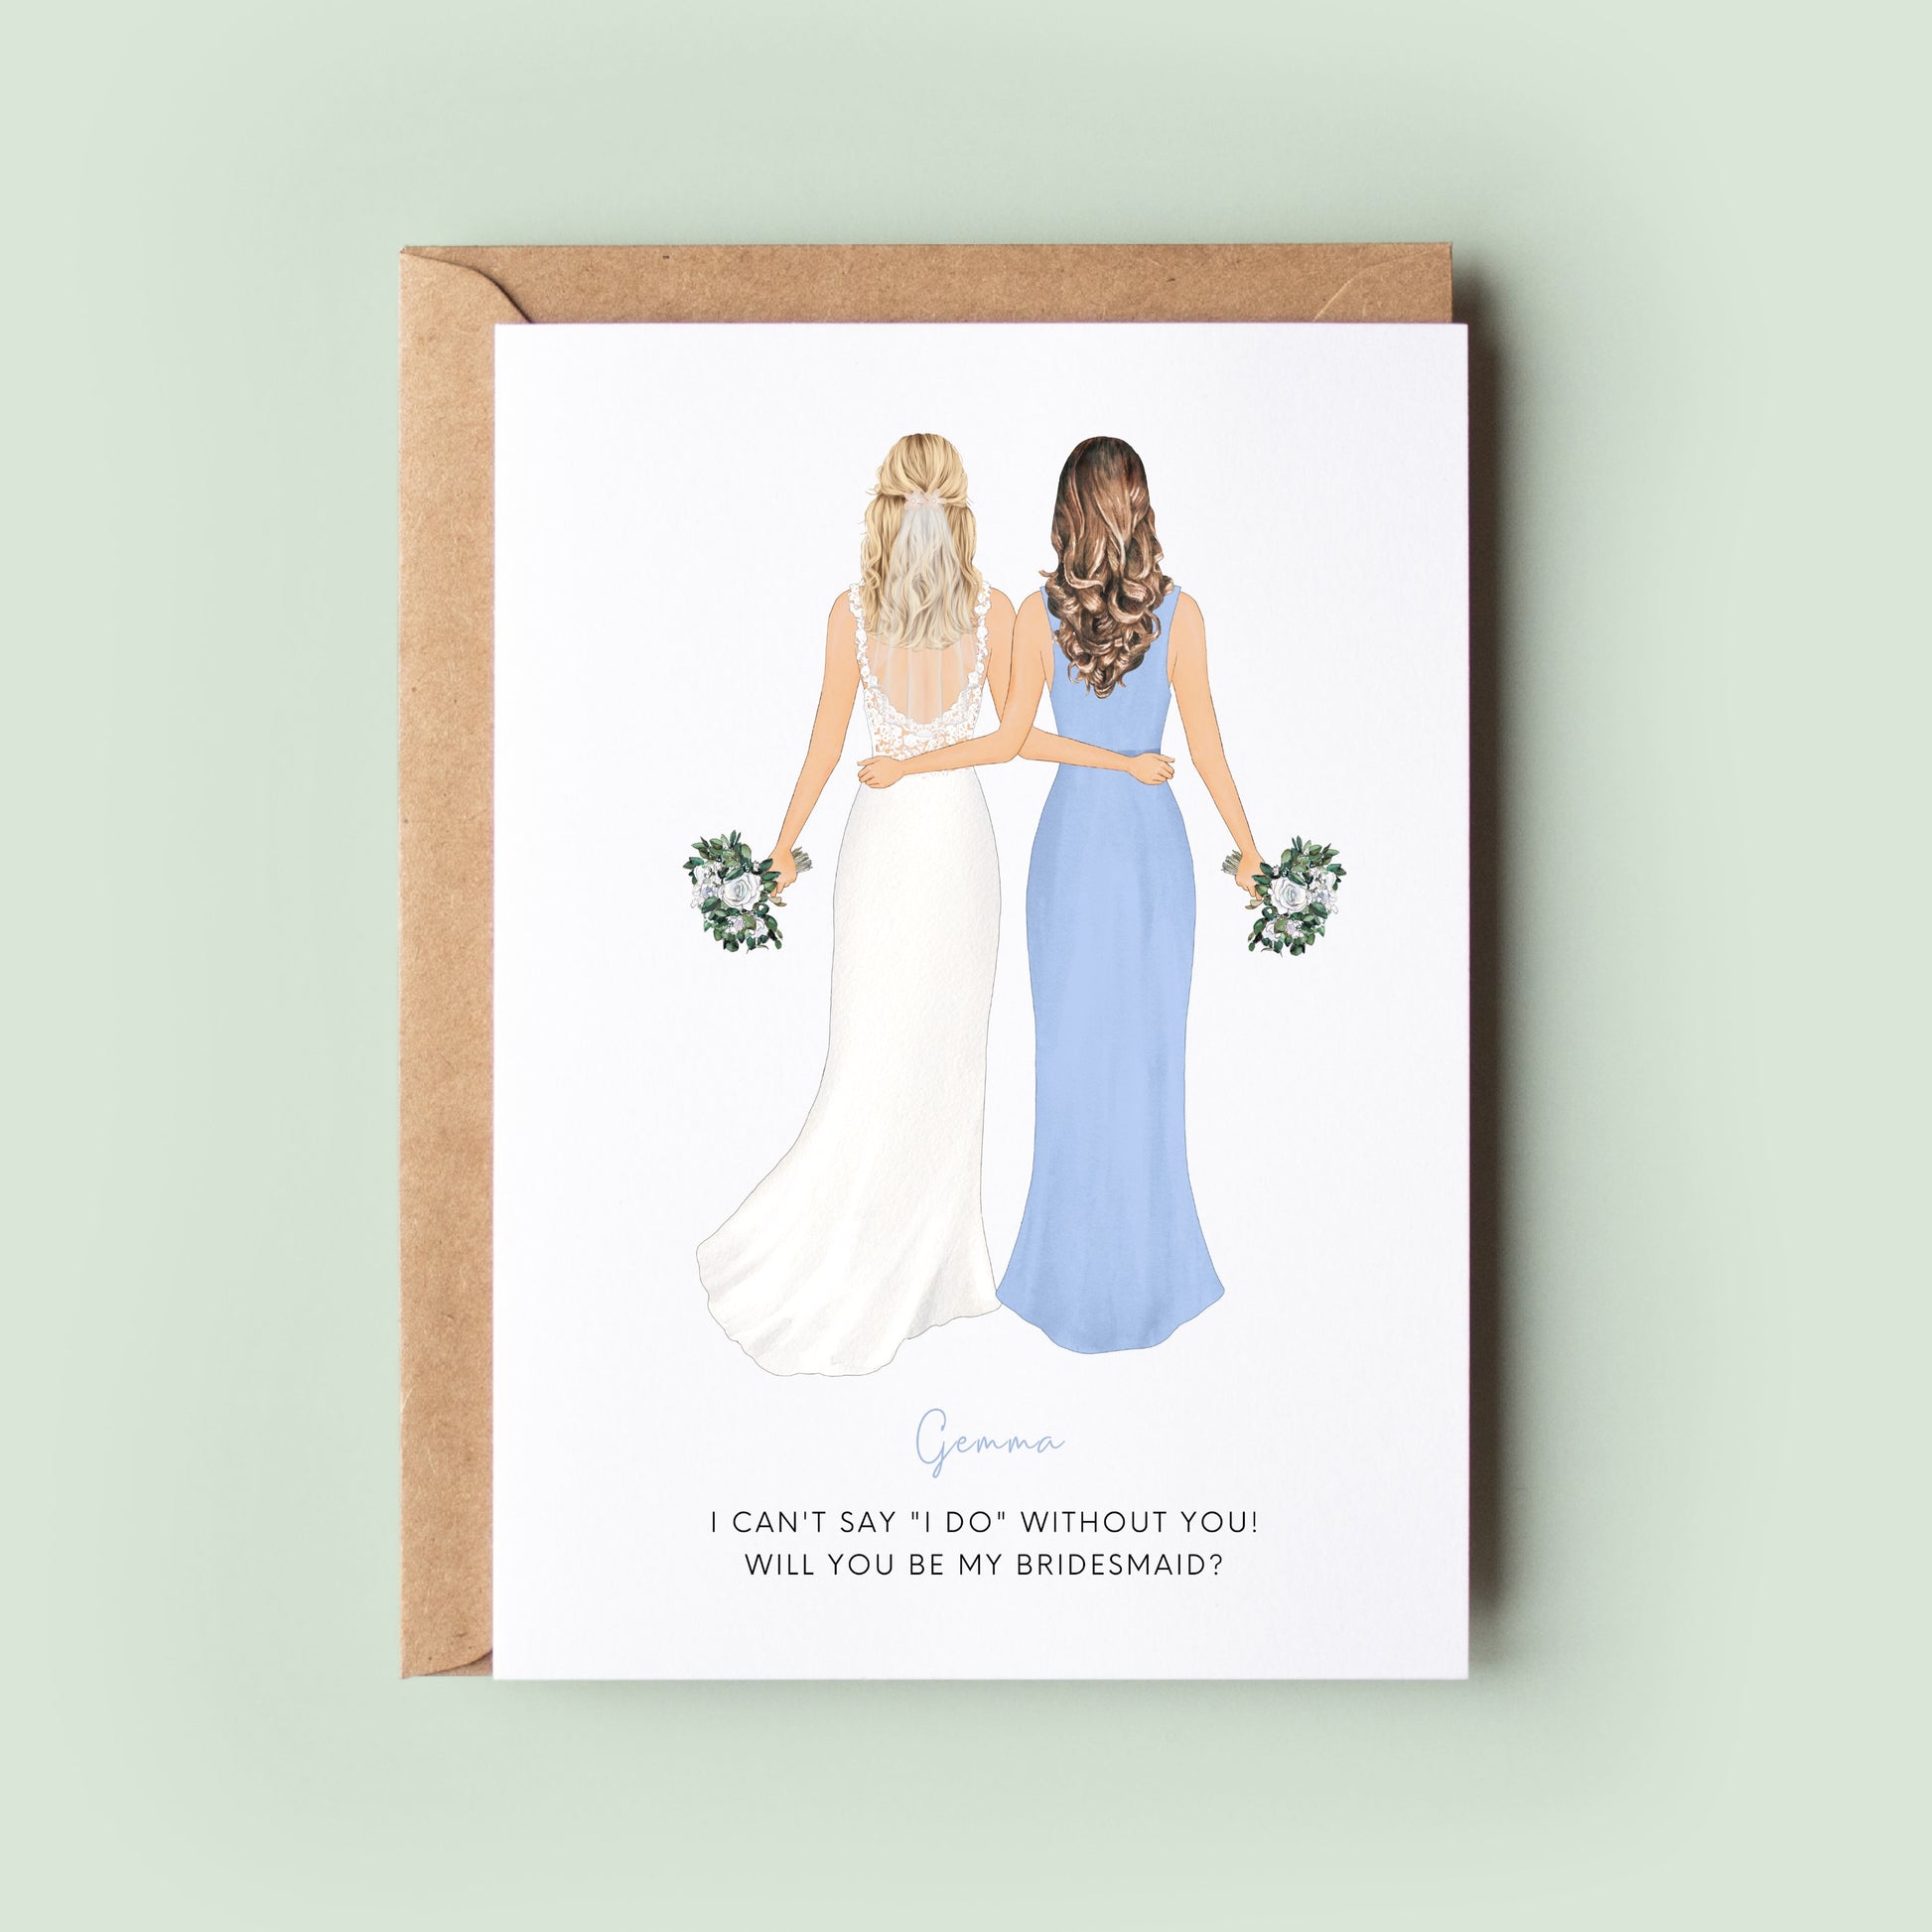 Will You Be My Bridesmaid, Personalized Bridesmaid, Bridesmaid Proposal, Will You Be My Bridesmaid Card, Maid of Honor Proposal #11000